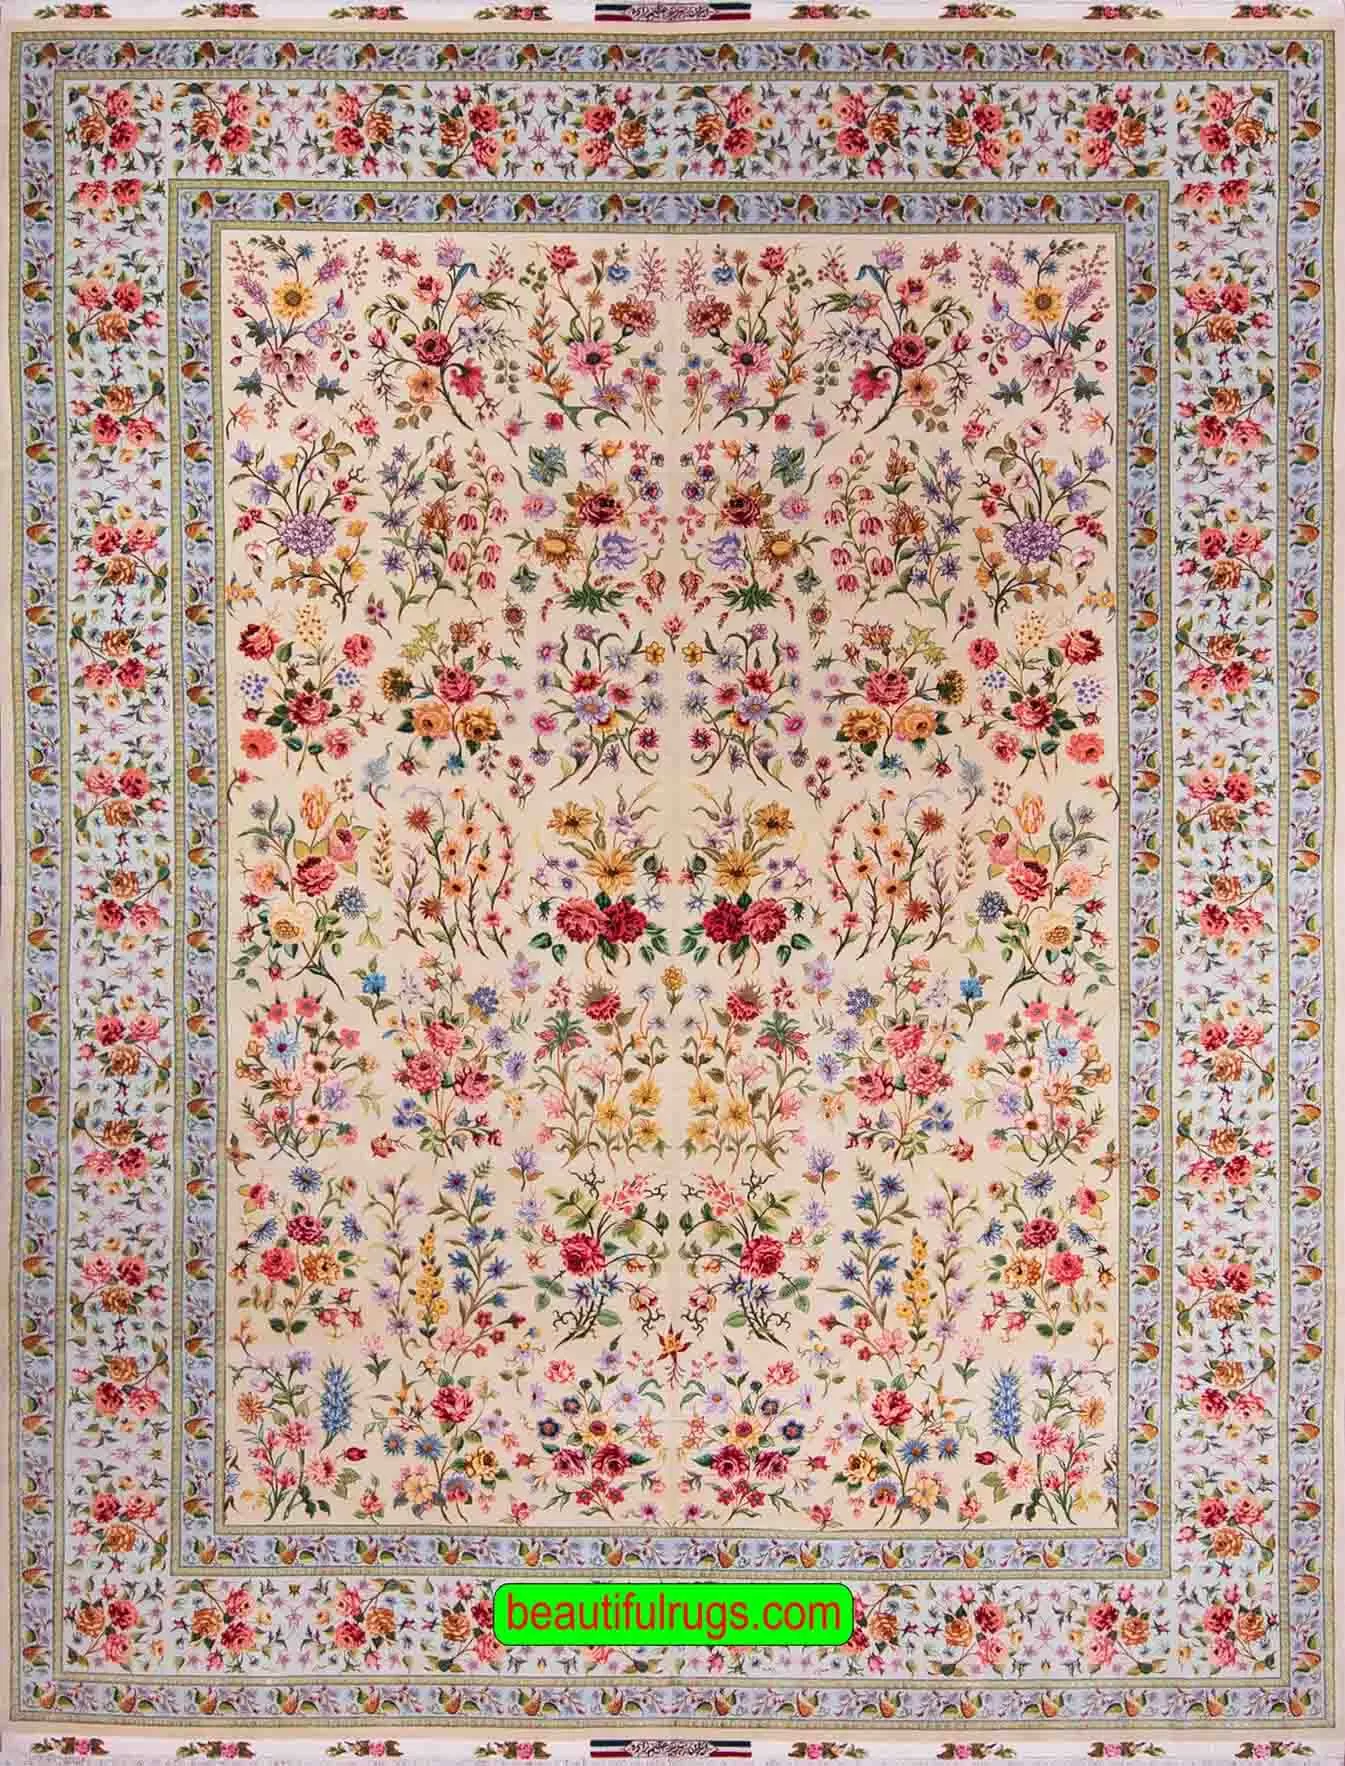 Azim Zadeh Rug, Persian Tabriz Rug, Masterpiece Bouquet of Roses Rug, size 9.9x1.36, main image